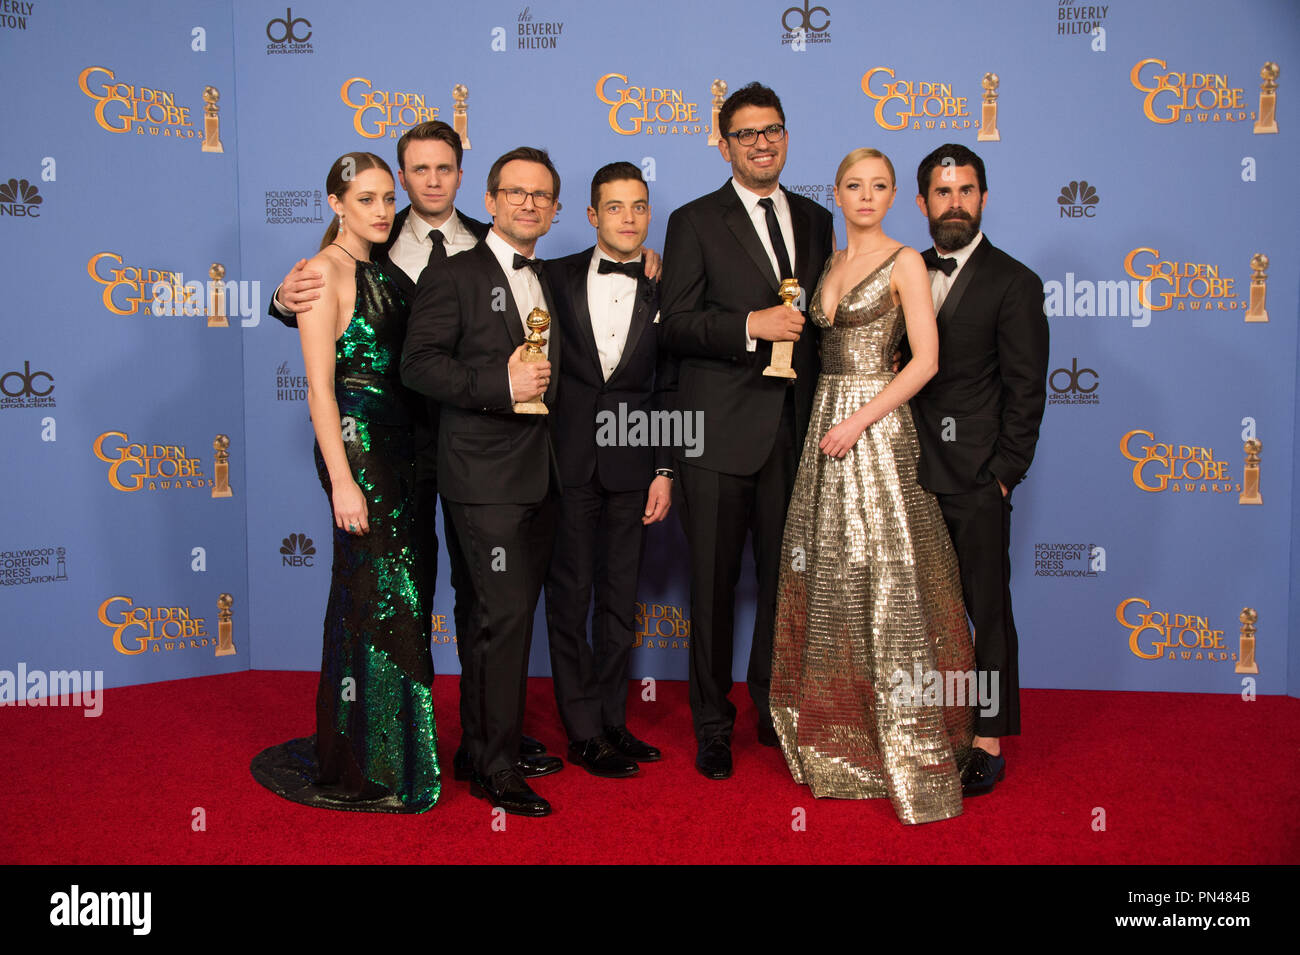 For BEST TELEVISION SERIES – DRAMA, the Golden Globe is awarded to 'Mr. Robot' (USA Network). Carly Chaikin, Martin Wallström, Christian Slater, Rami Malek, Sam Esmail, Portia Doubleday and Chad Hamilton pose with the award backstage in the press room at the 73rd Annual Golden Globe Awards at the Beverly Hilton in Beverly Hills, CA on Sunday, January 10, 2016. Stock Photo